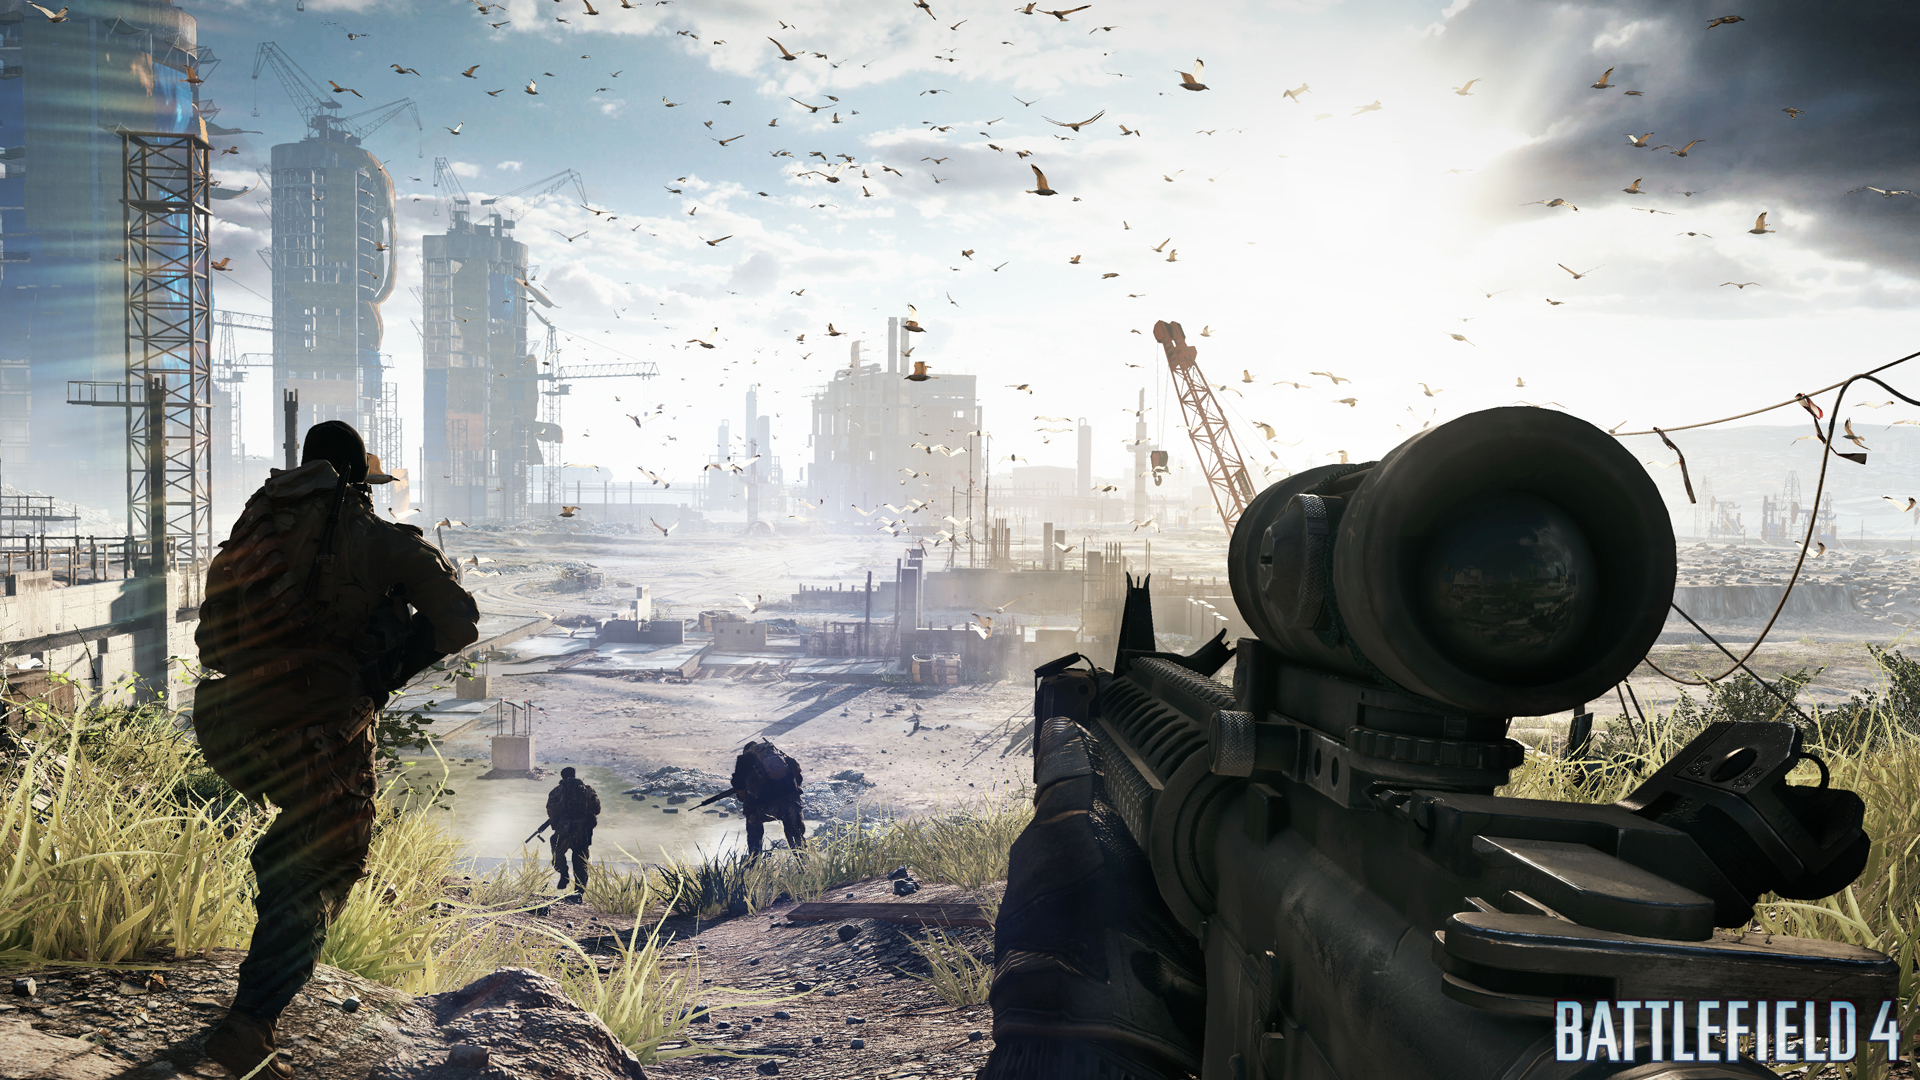 Battlefield 4 PS4 patch delayed, China Rising DLC out now - GameSpot